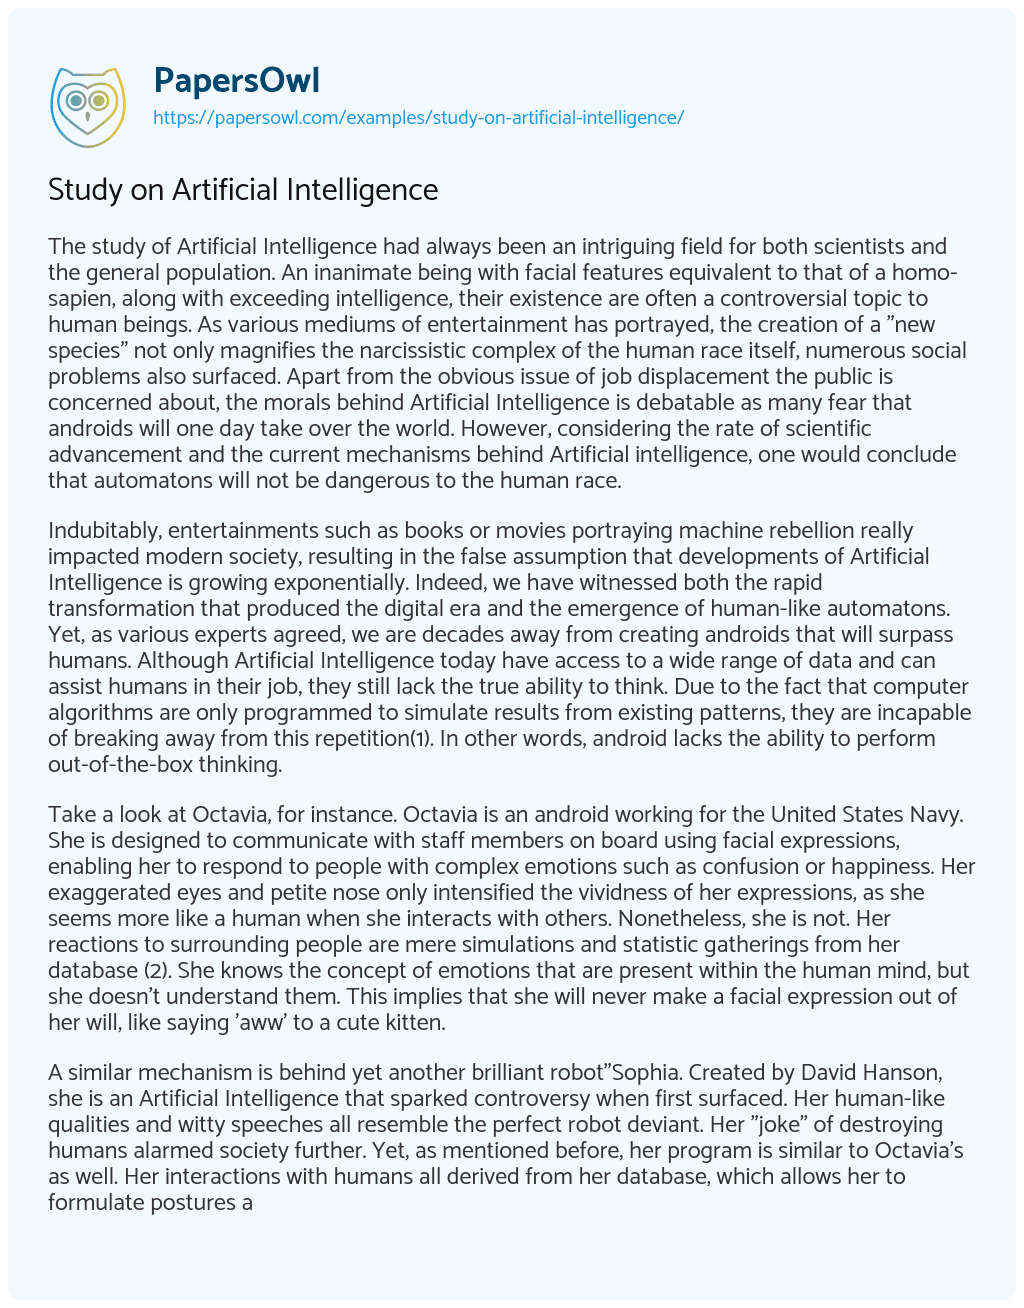 Essay on Study on Artificial Intelligence